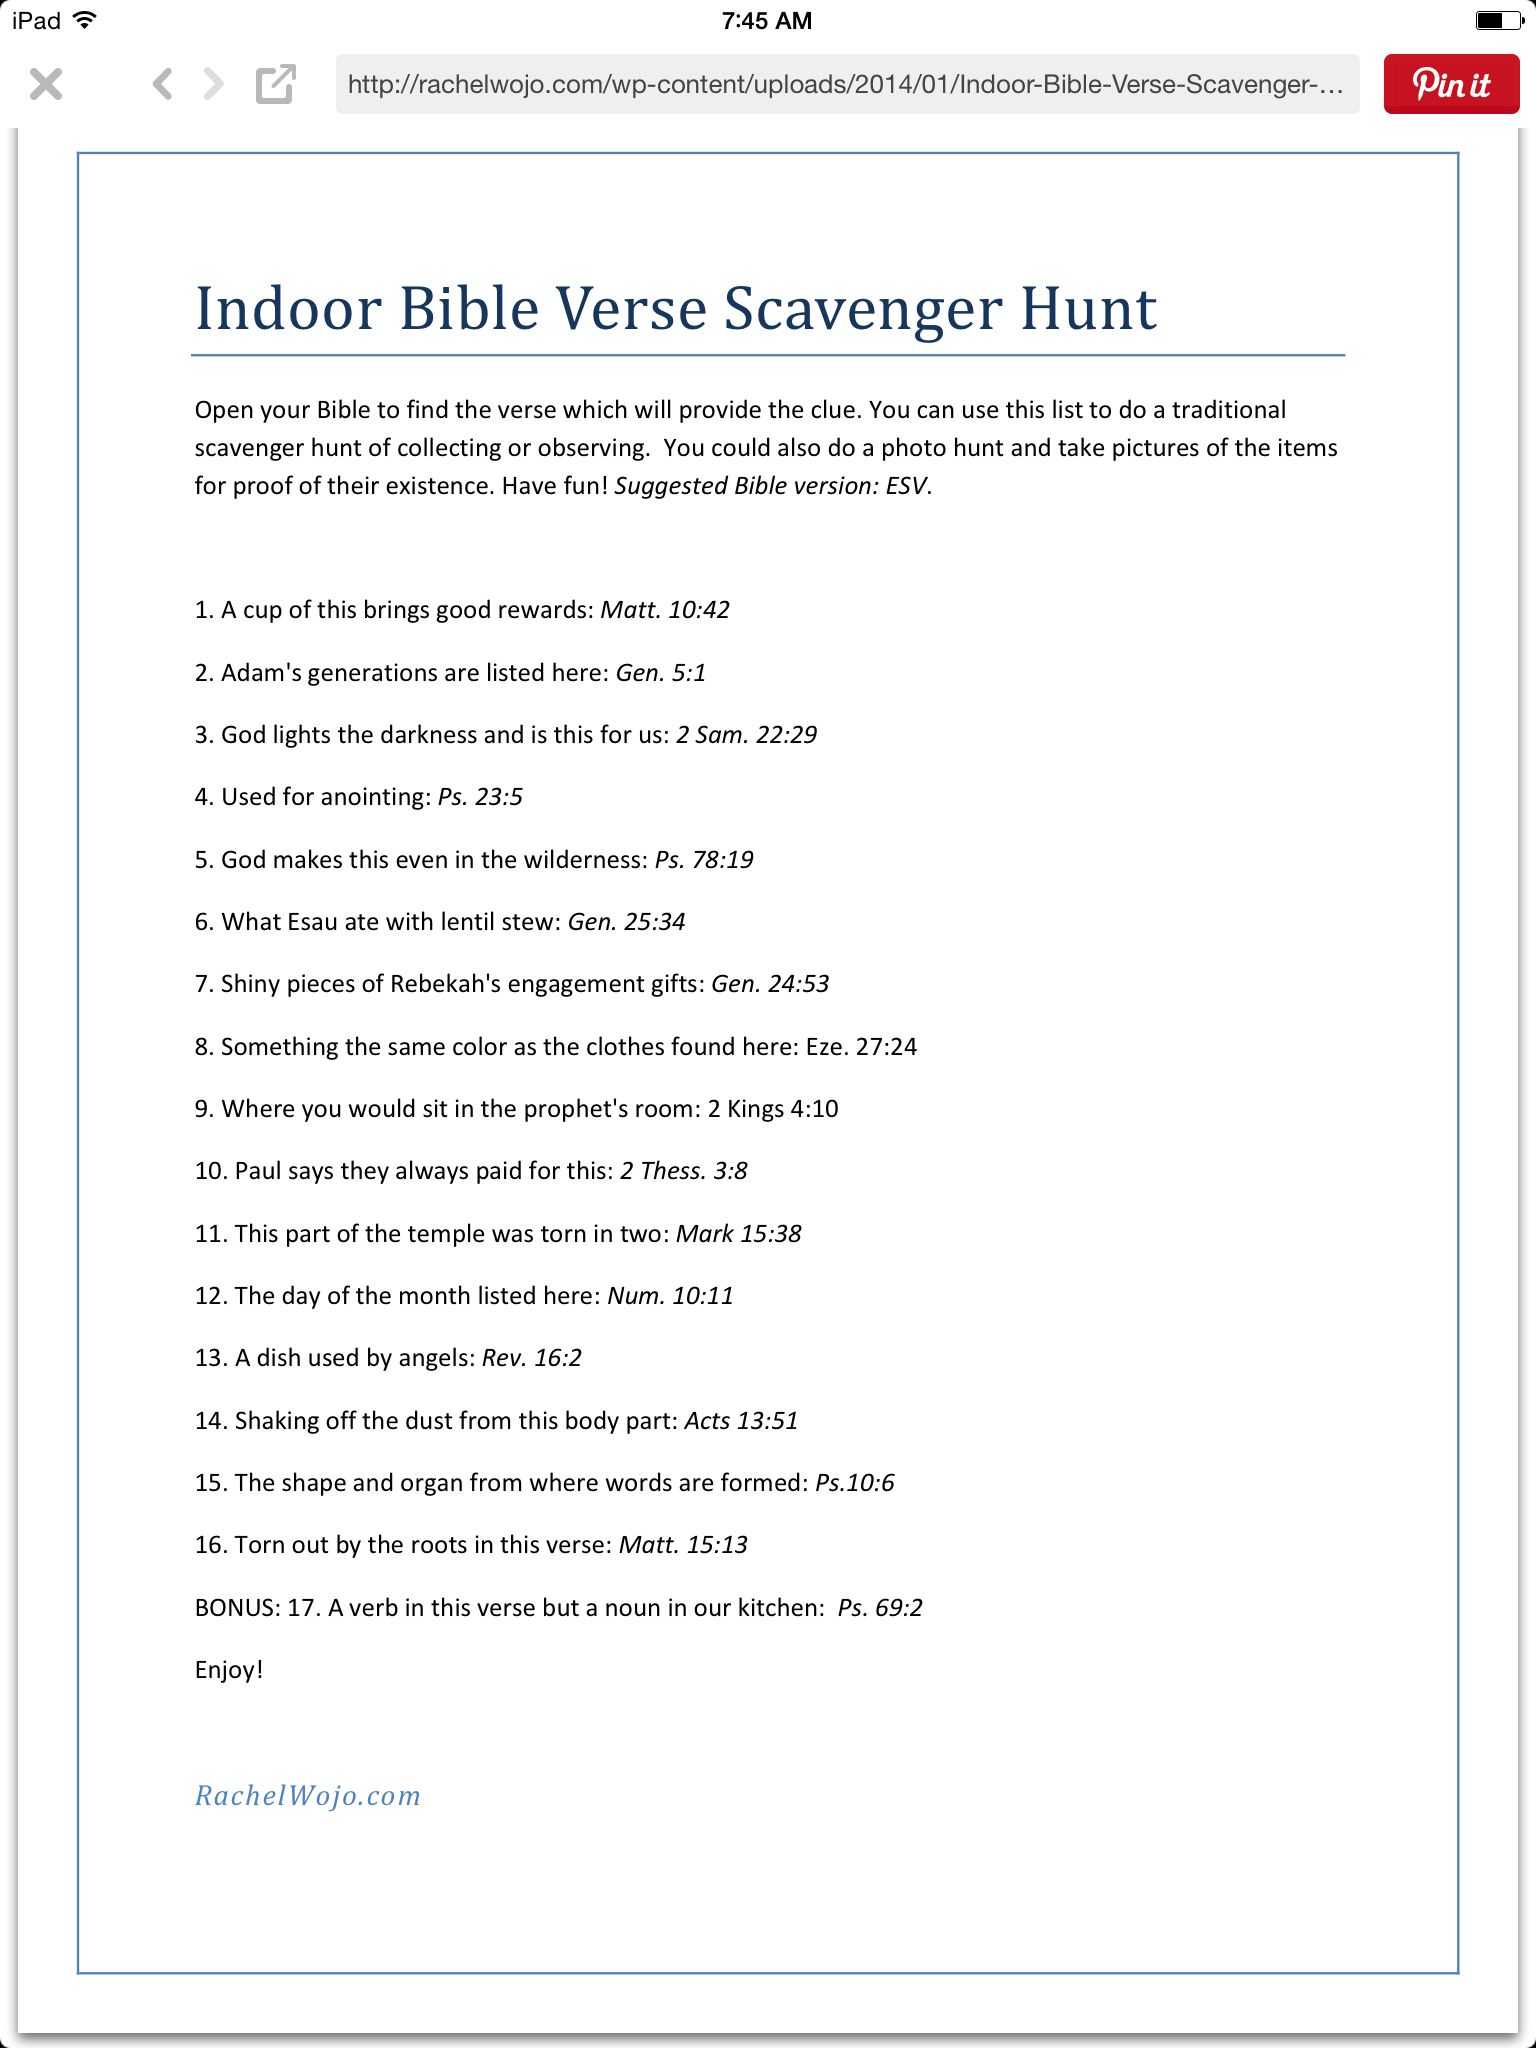 Scavenger Hunt Worksheet and Indoor Bible Verse Scavenger Hunt is Would Be Fun Maybe Doesn T